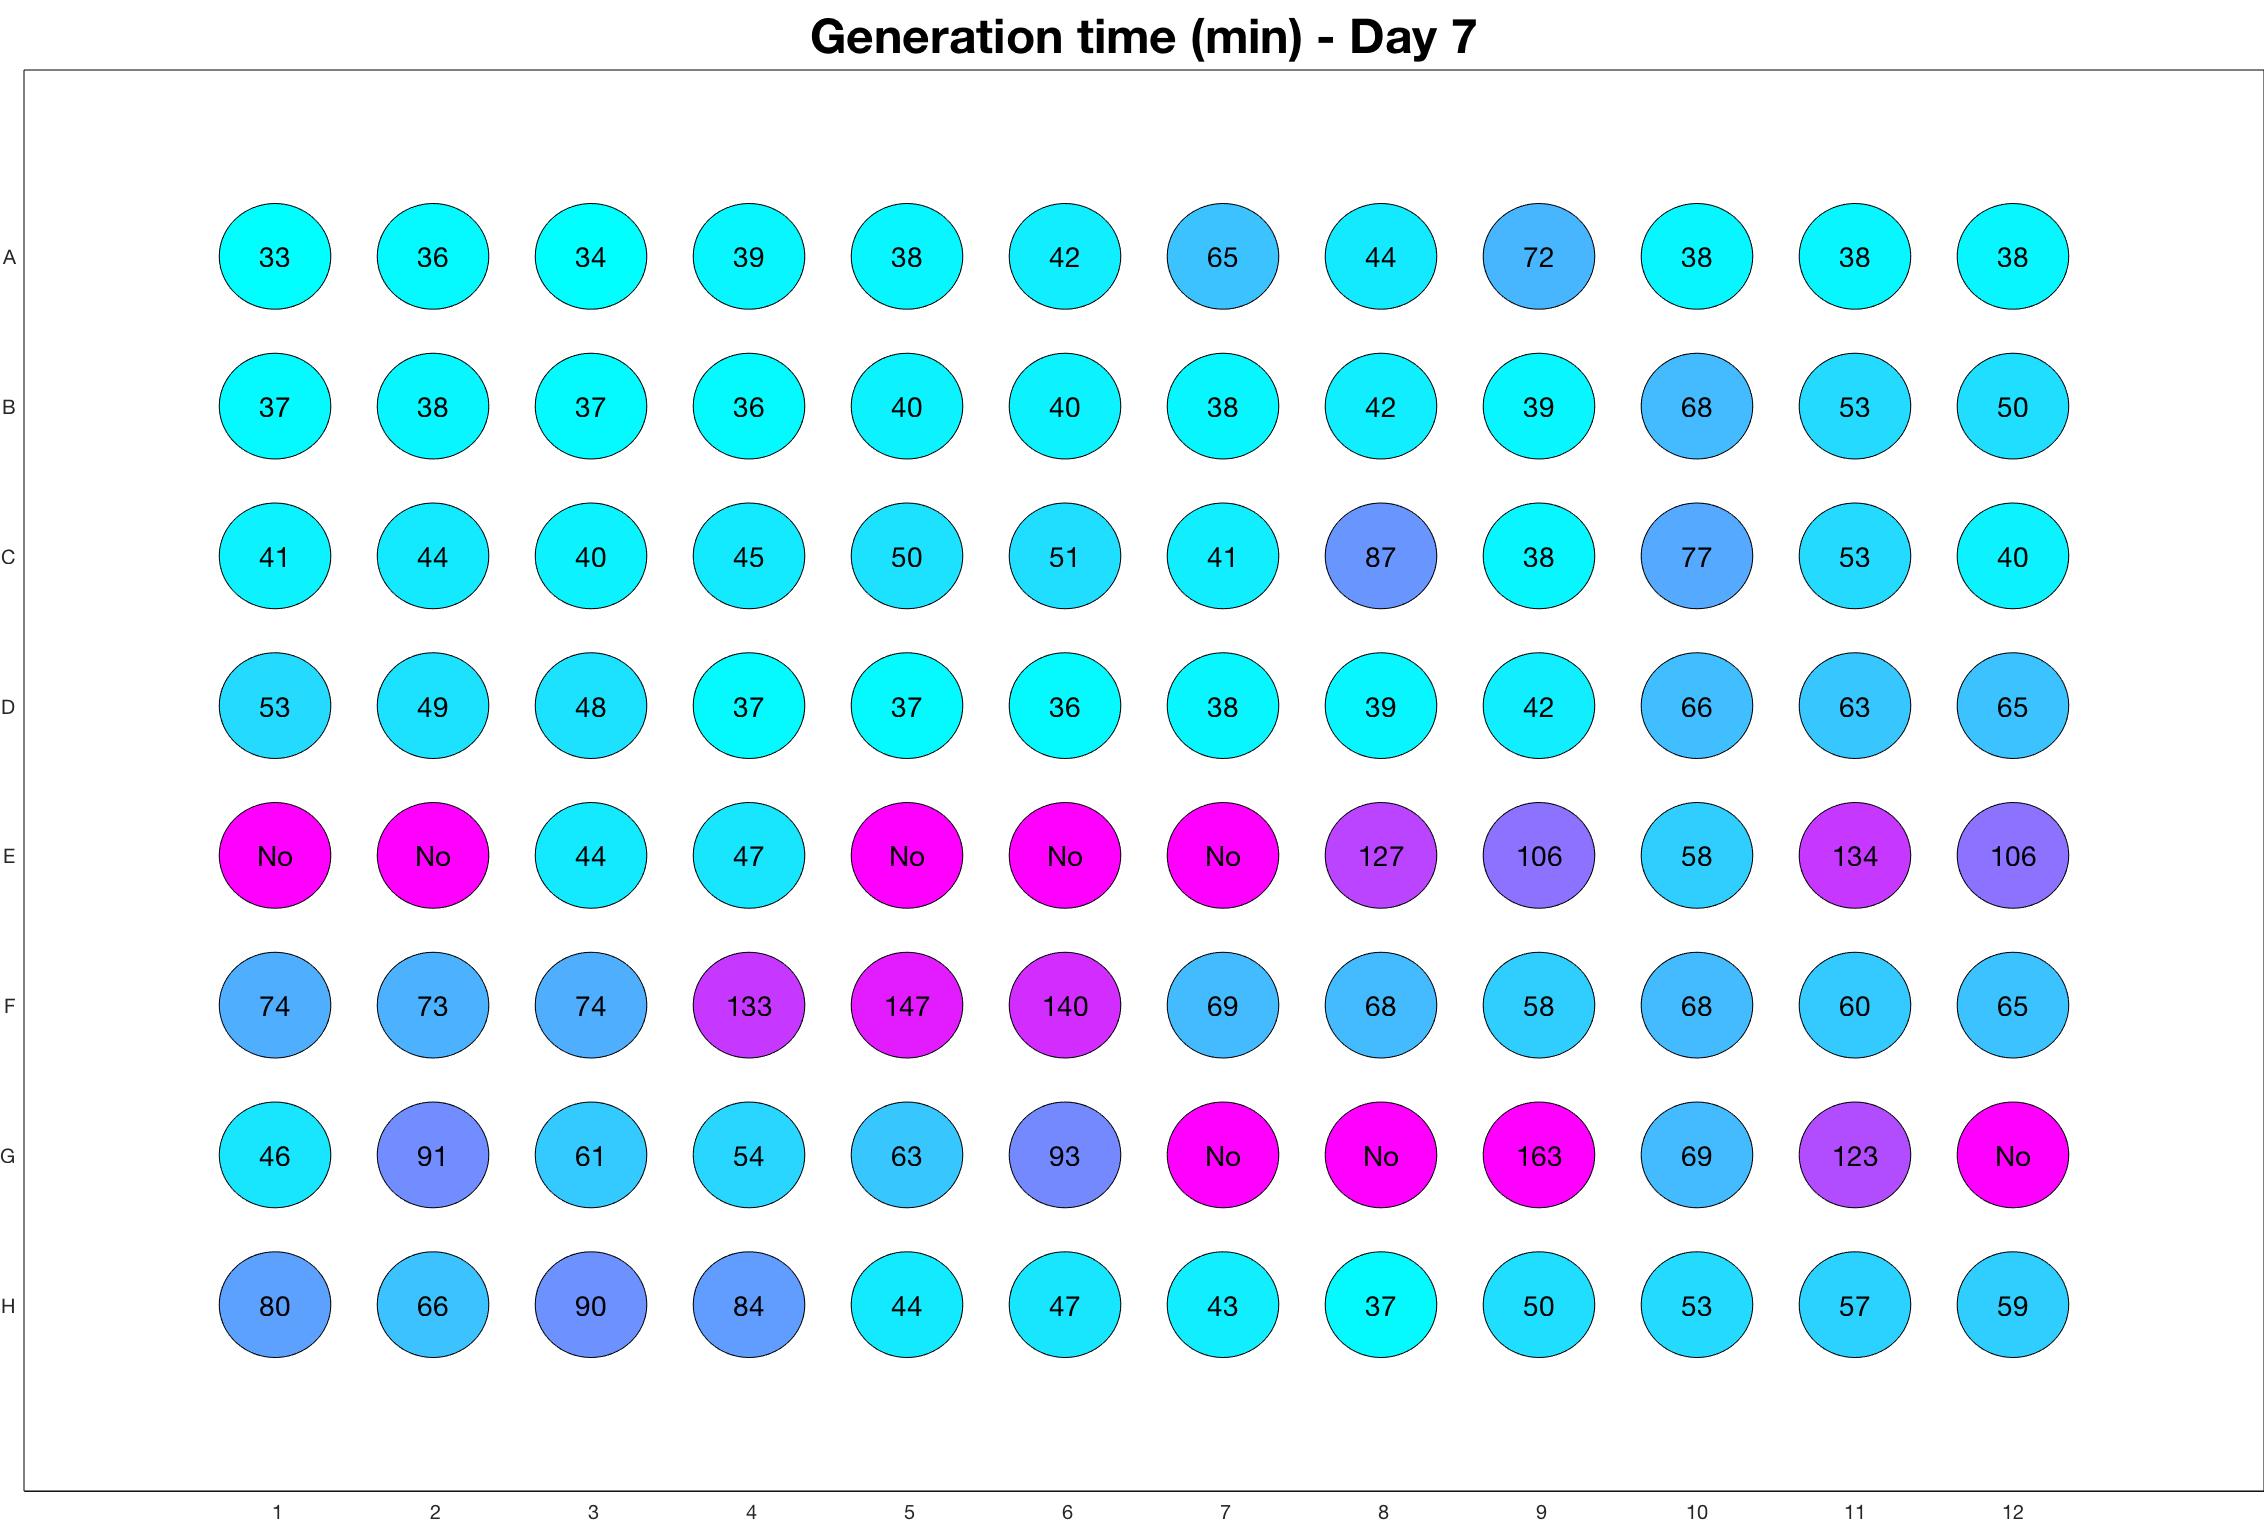 Generation time for day - 7.jpg